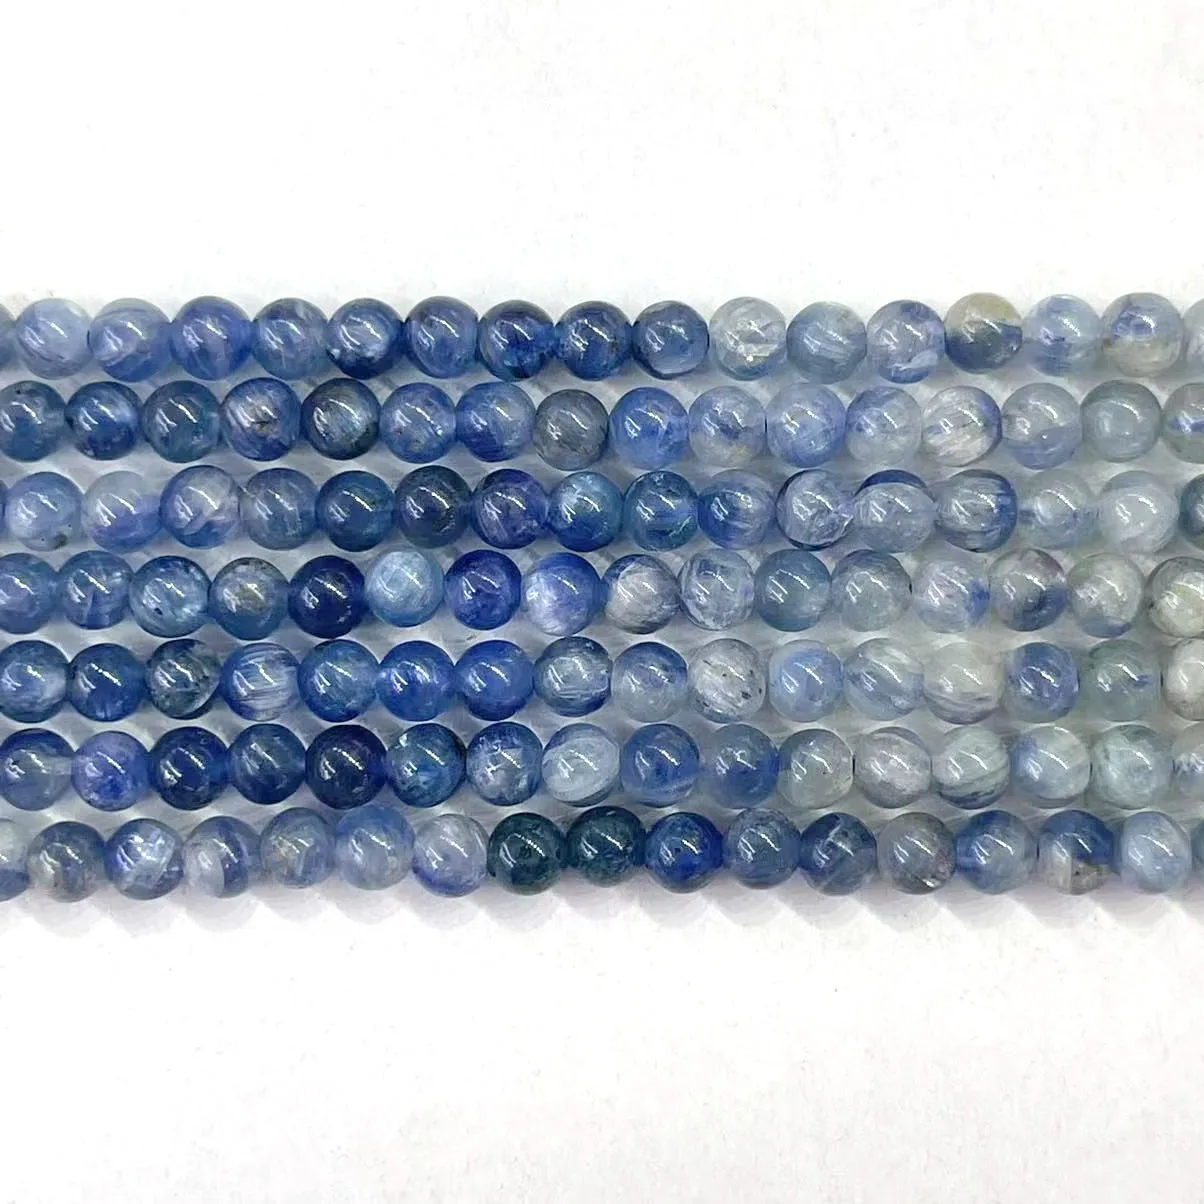 

4MM Genuine Natural Blue Kyanite Stone Round Smooth Disthene Cyanite Loose Beads Strand For DIY Necklace Jewelry Accessories